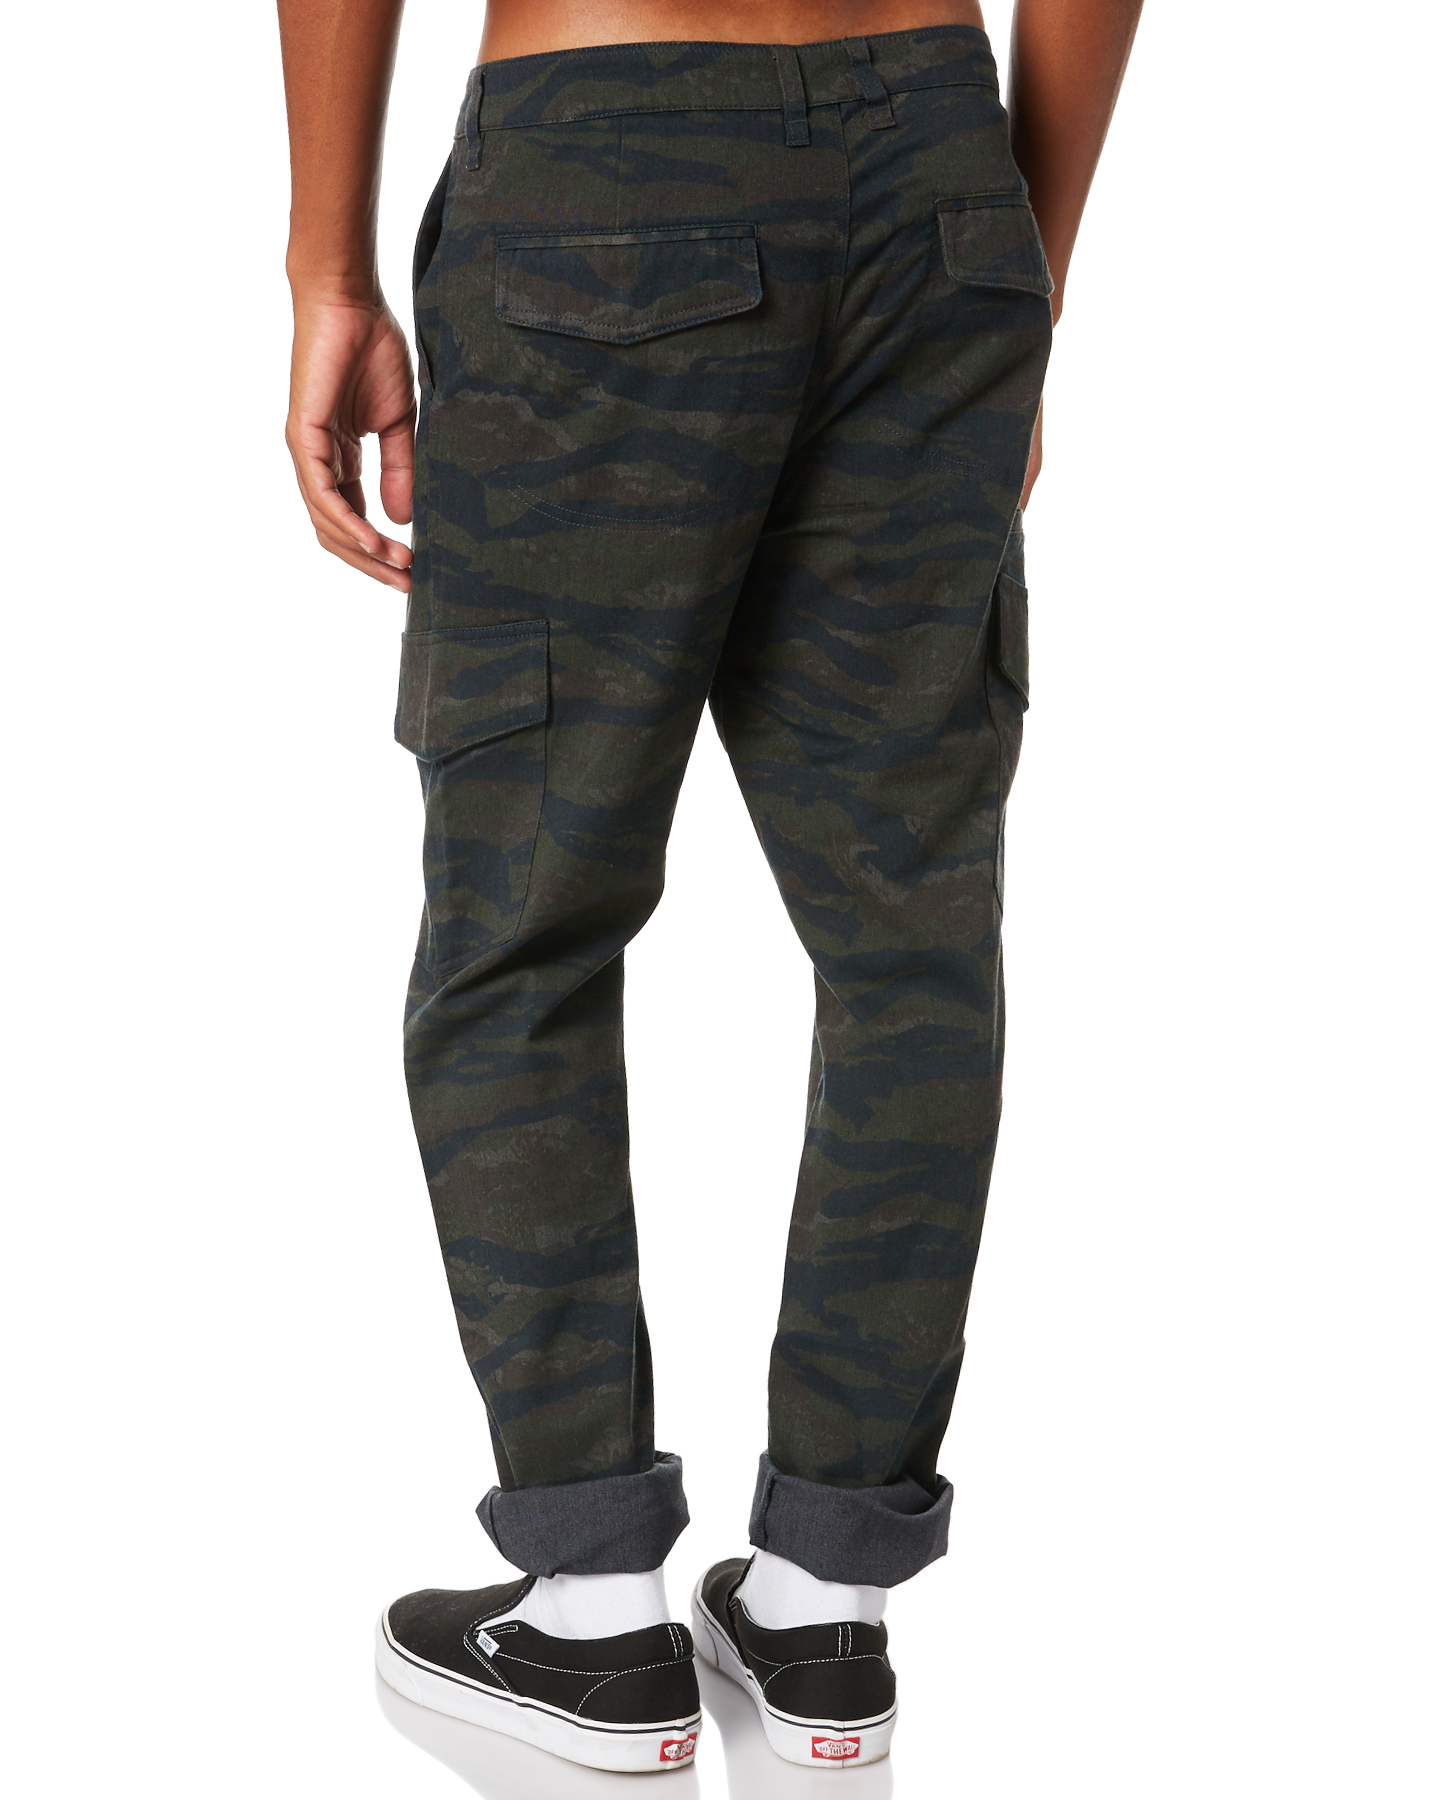 Salty Crew Cutty Mens Technical Fishing Cargo Pant - Camo | SurfStitch